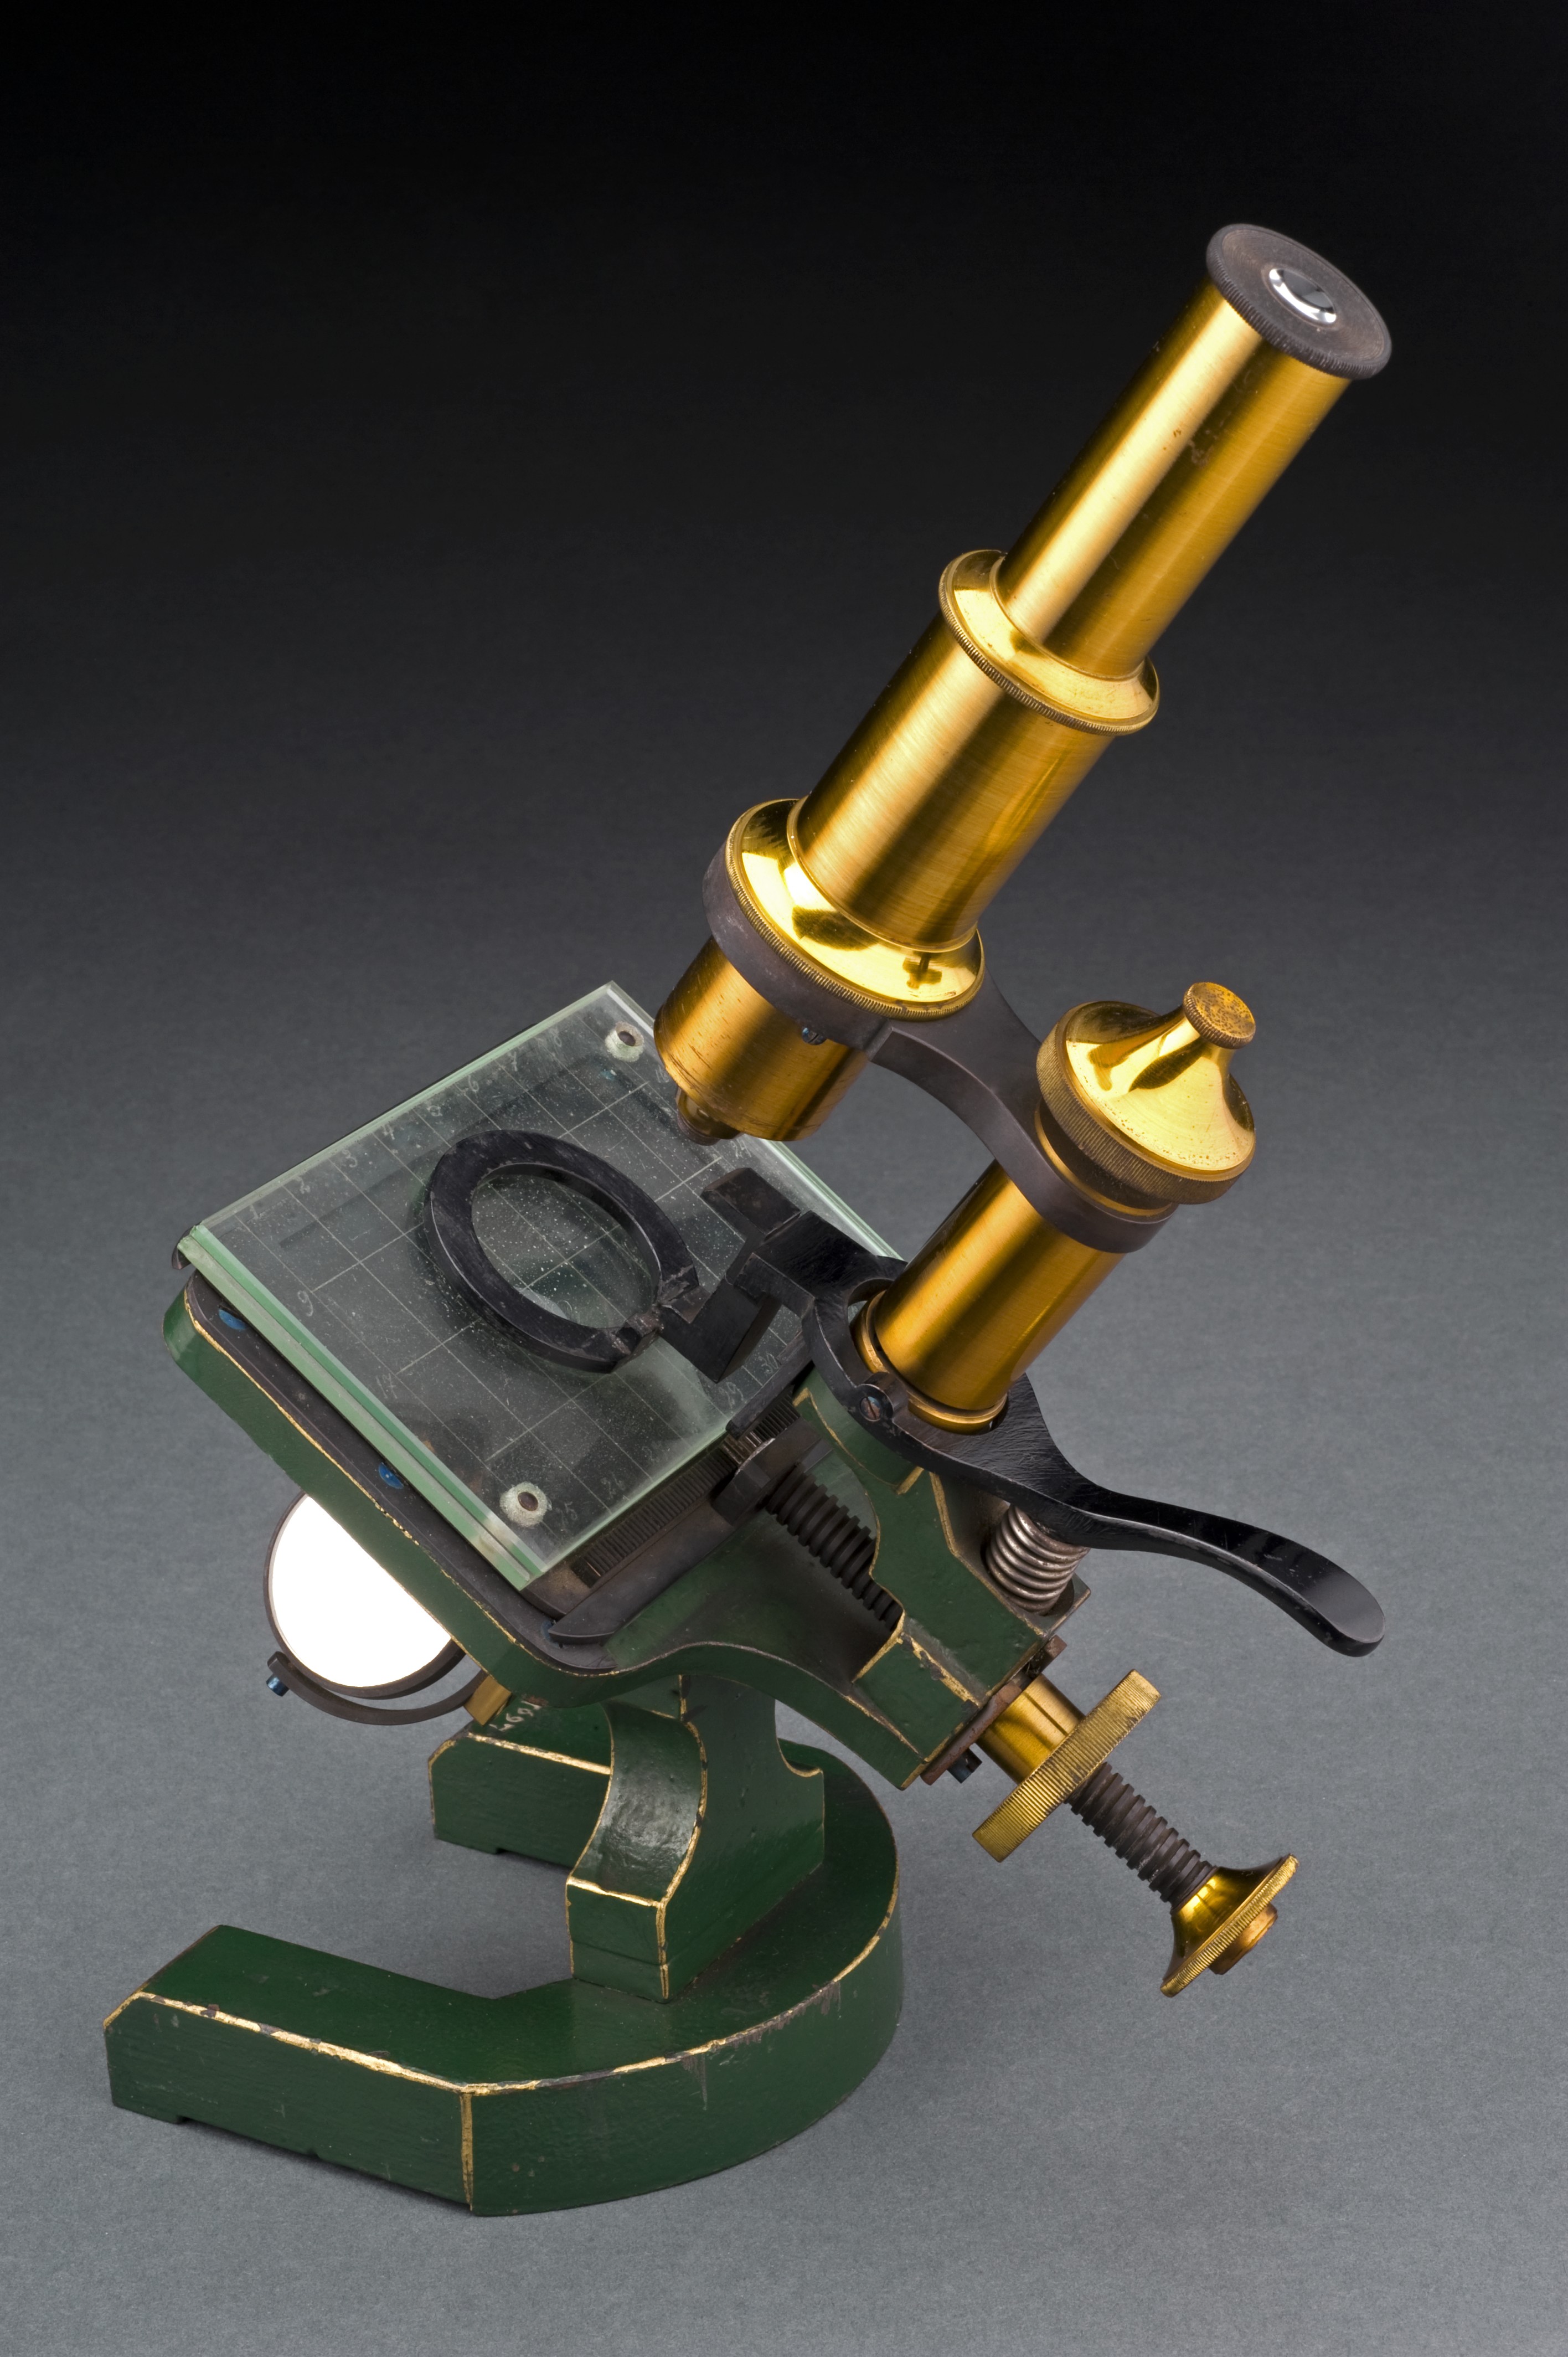 Compound microscope used to examine meat, France, 1851-1900 Wellcome L0057251